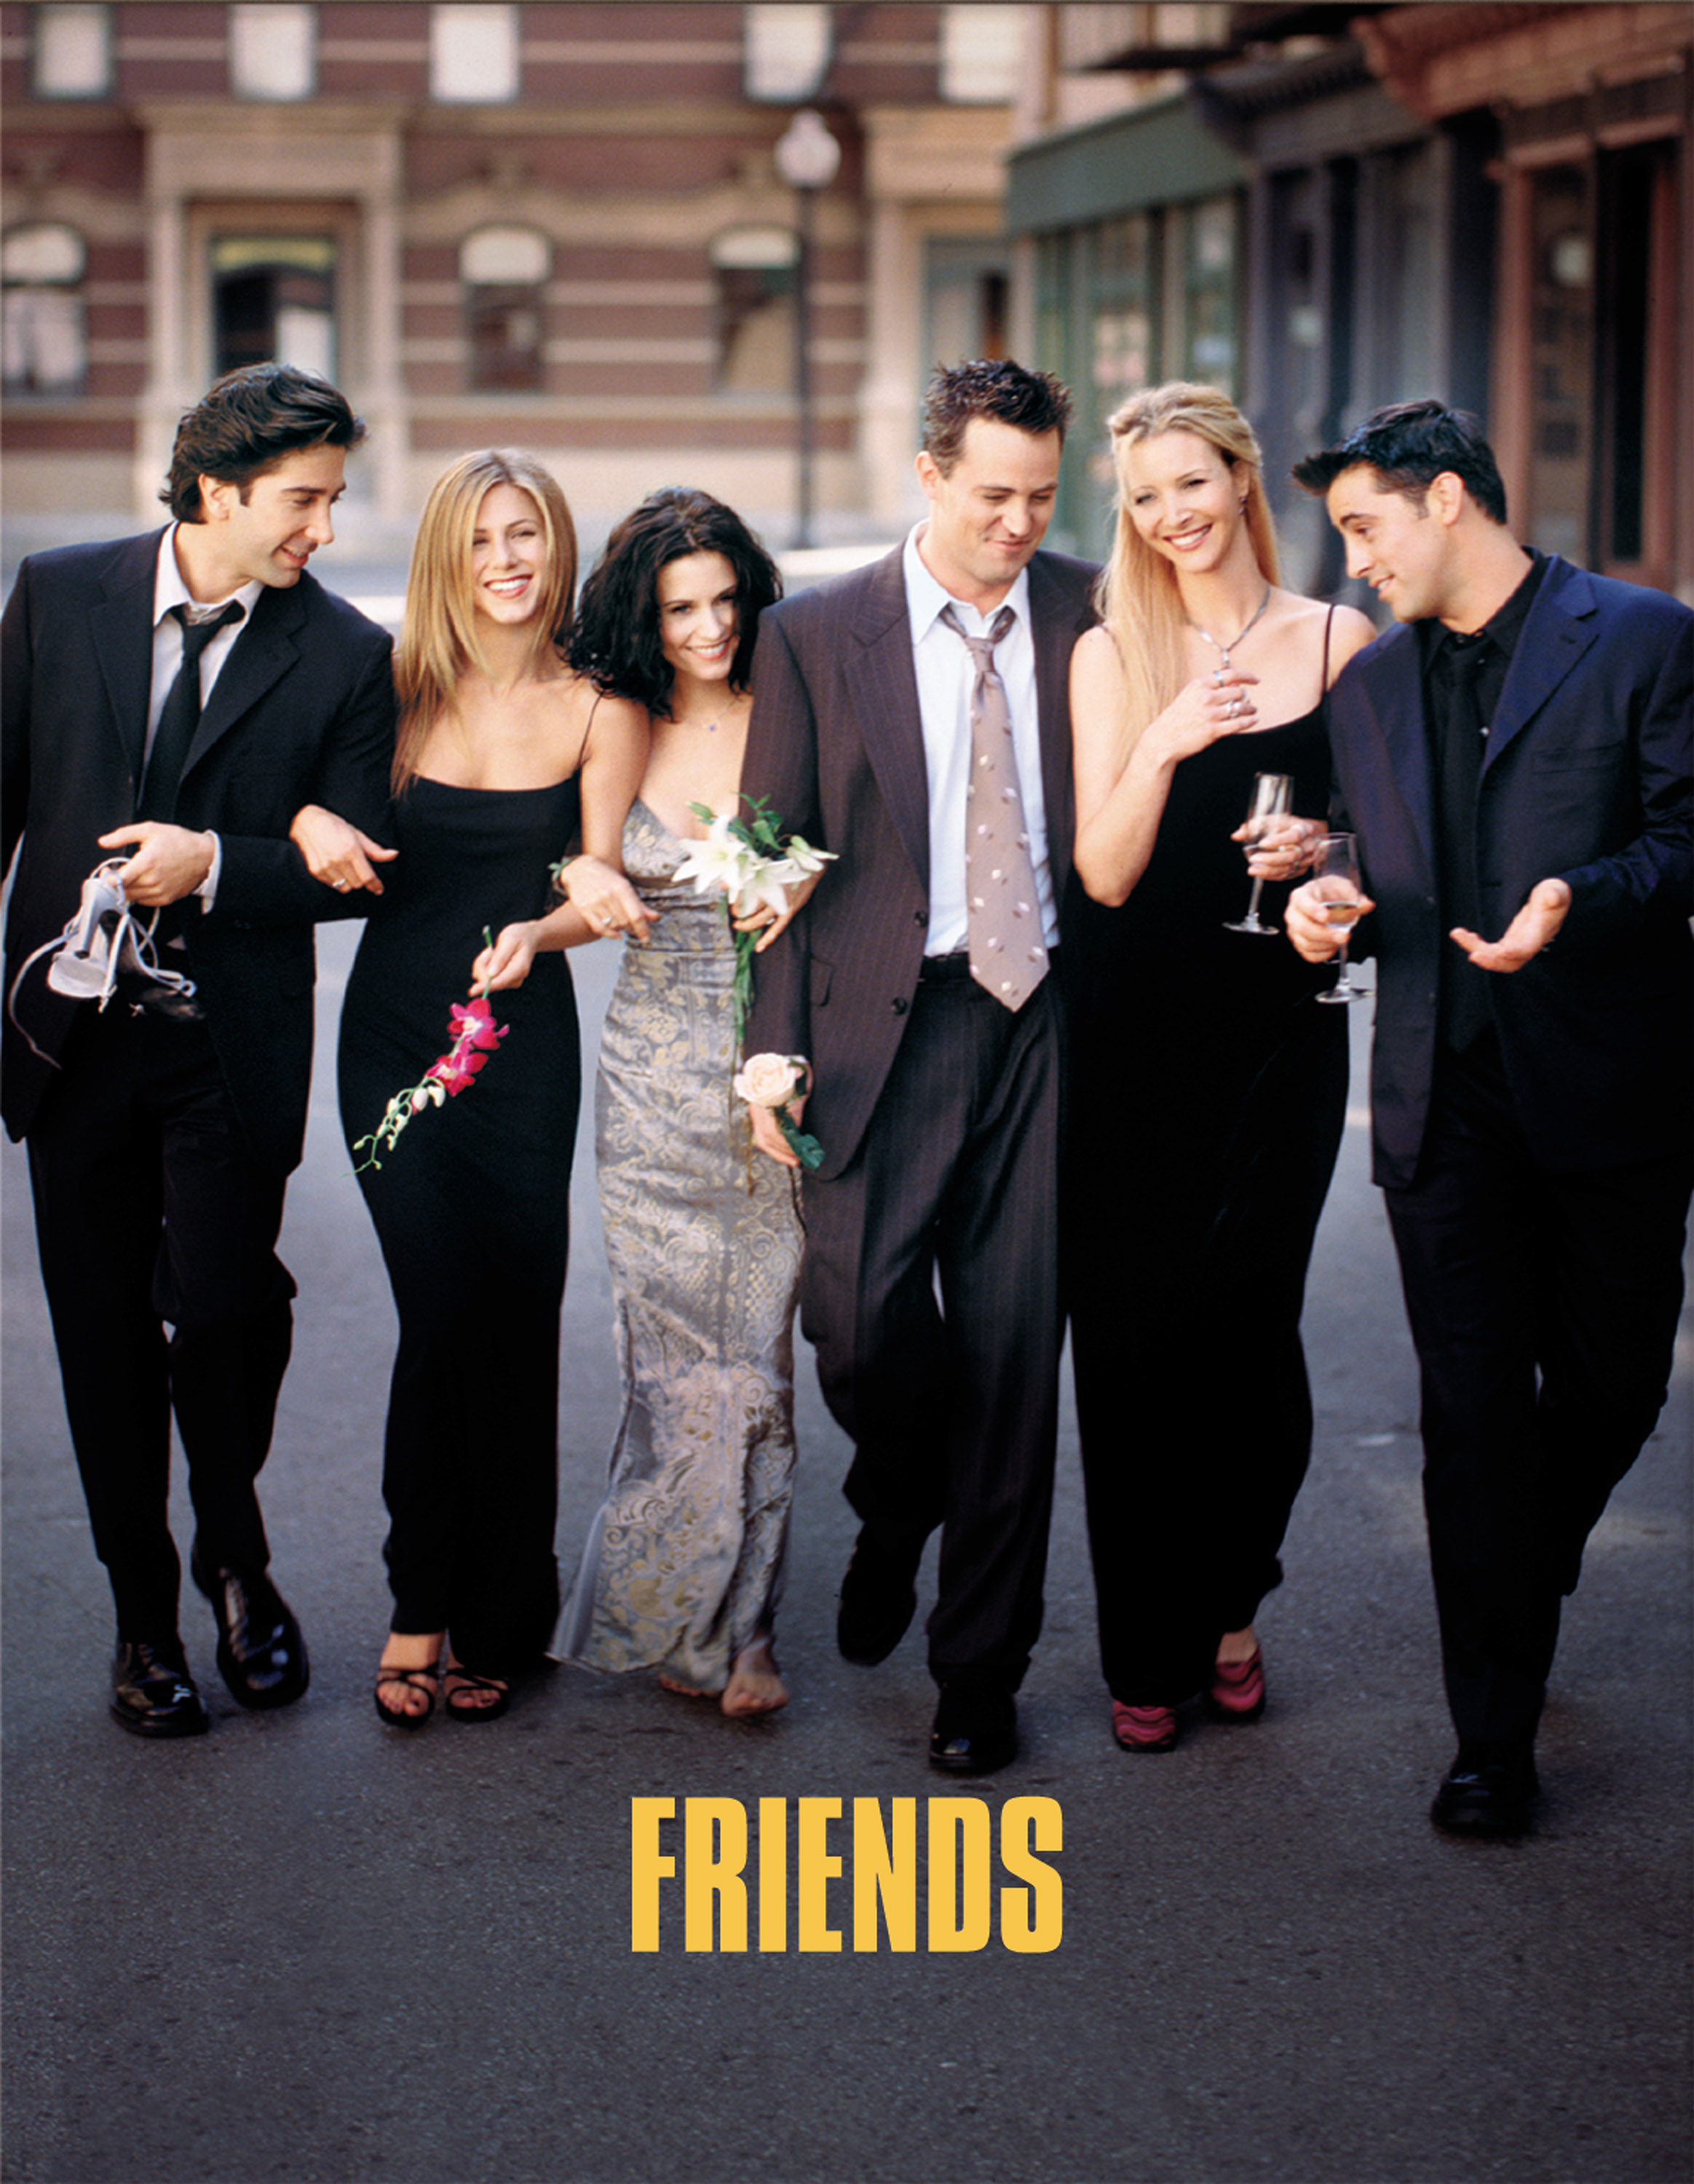 Things you only notice about Friends as an adult